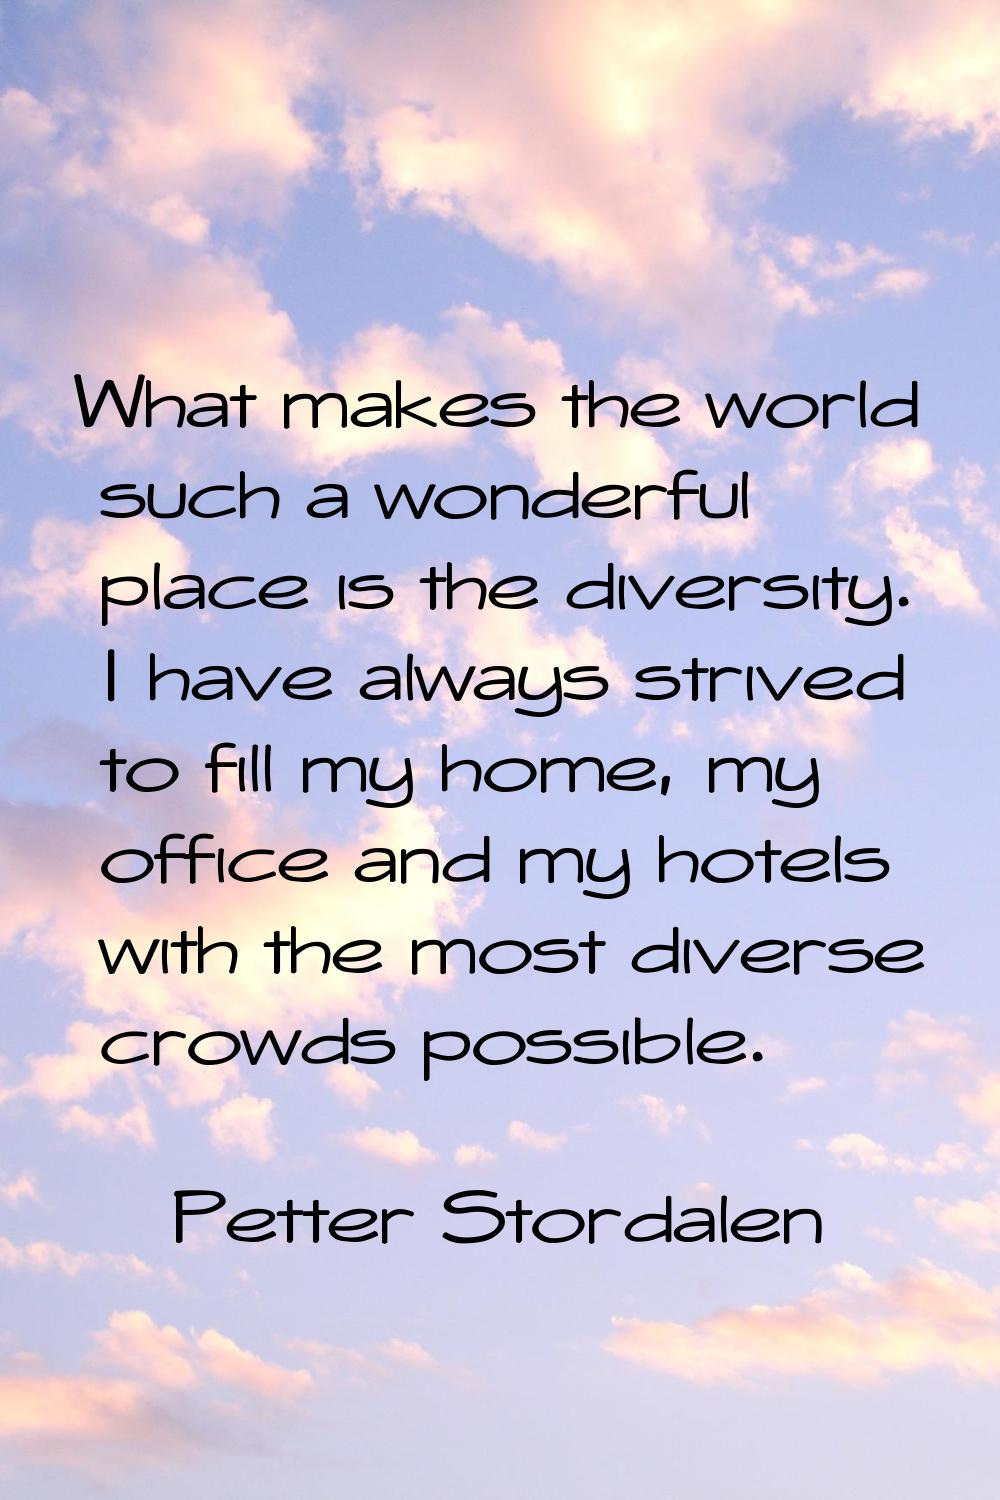 What makes the world such a wonderful place is the diversity. I have always strived to fill my home